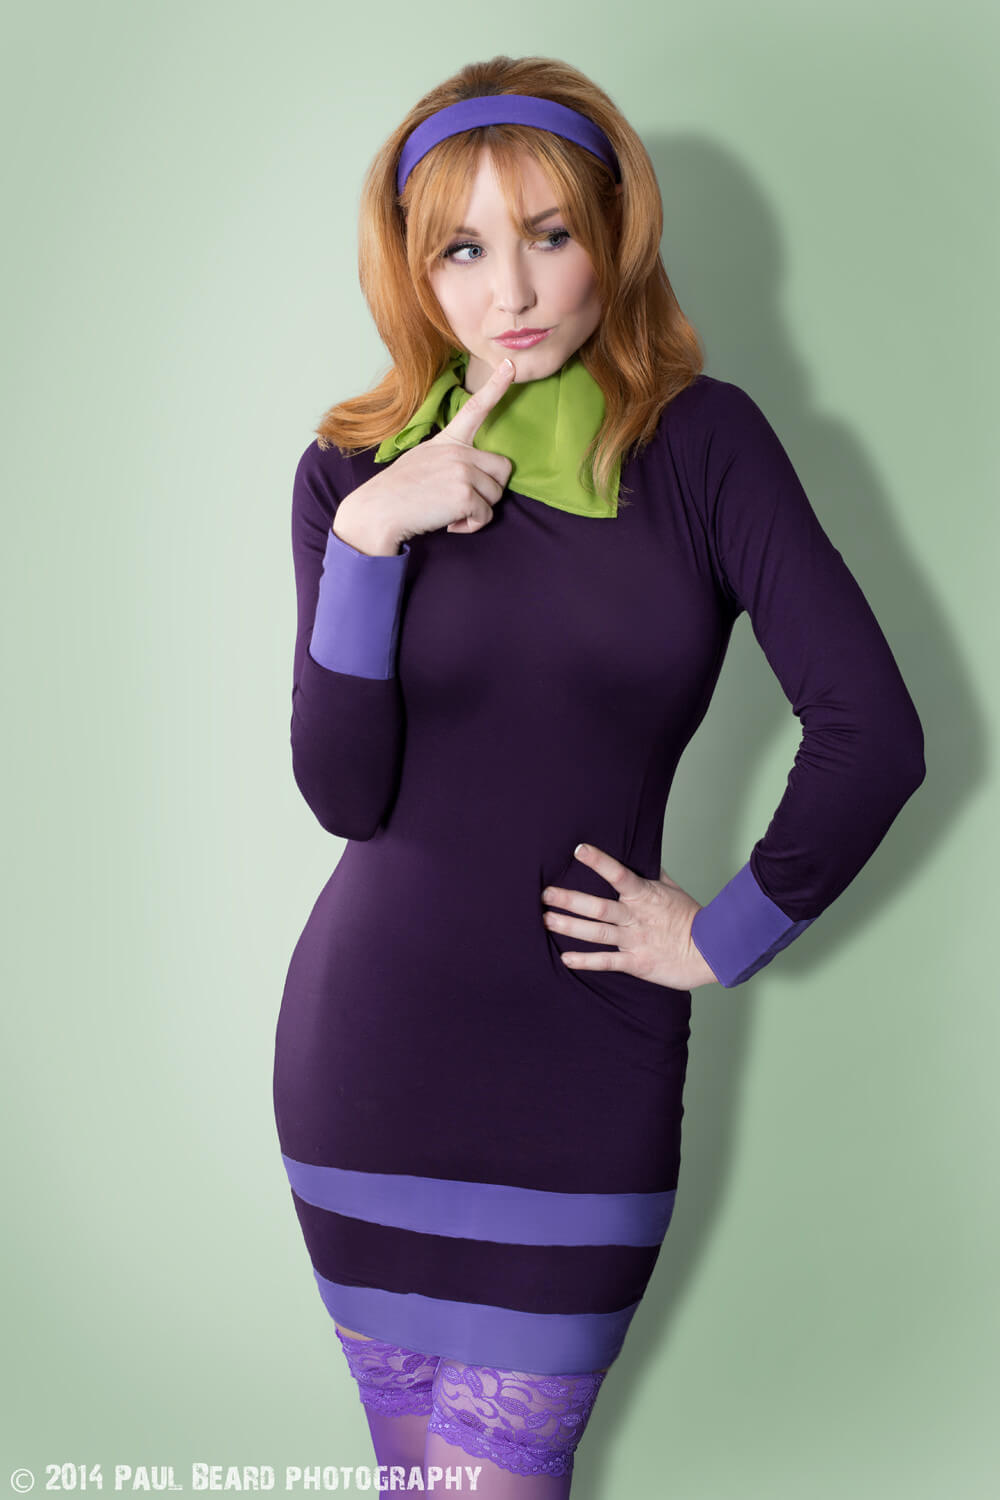 70+ Hot Pictures Of Daphne Blake From Scooby Doo Which Are Sure to Catch Your Attention 67